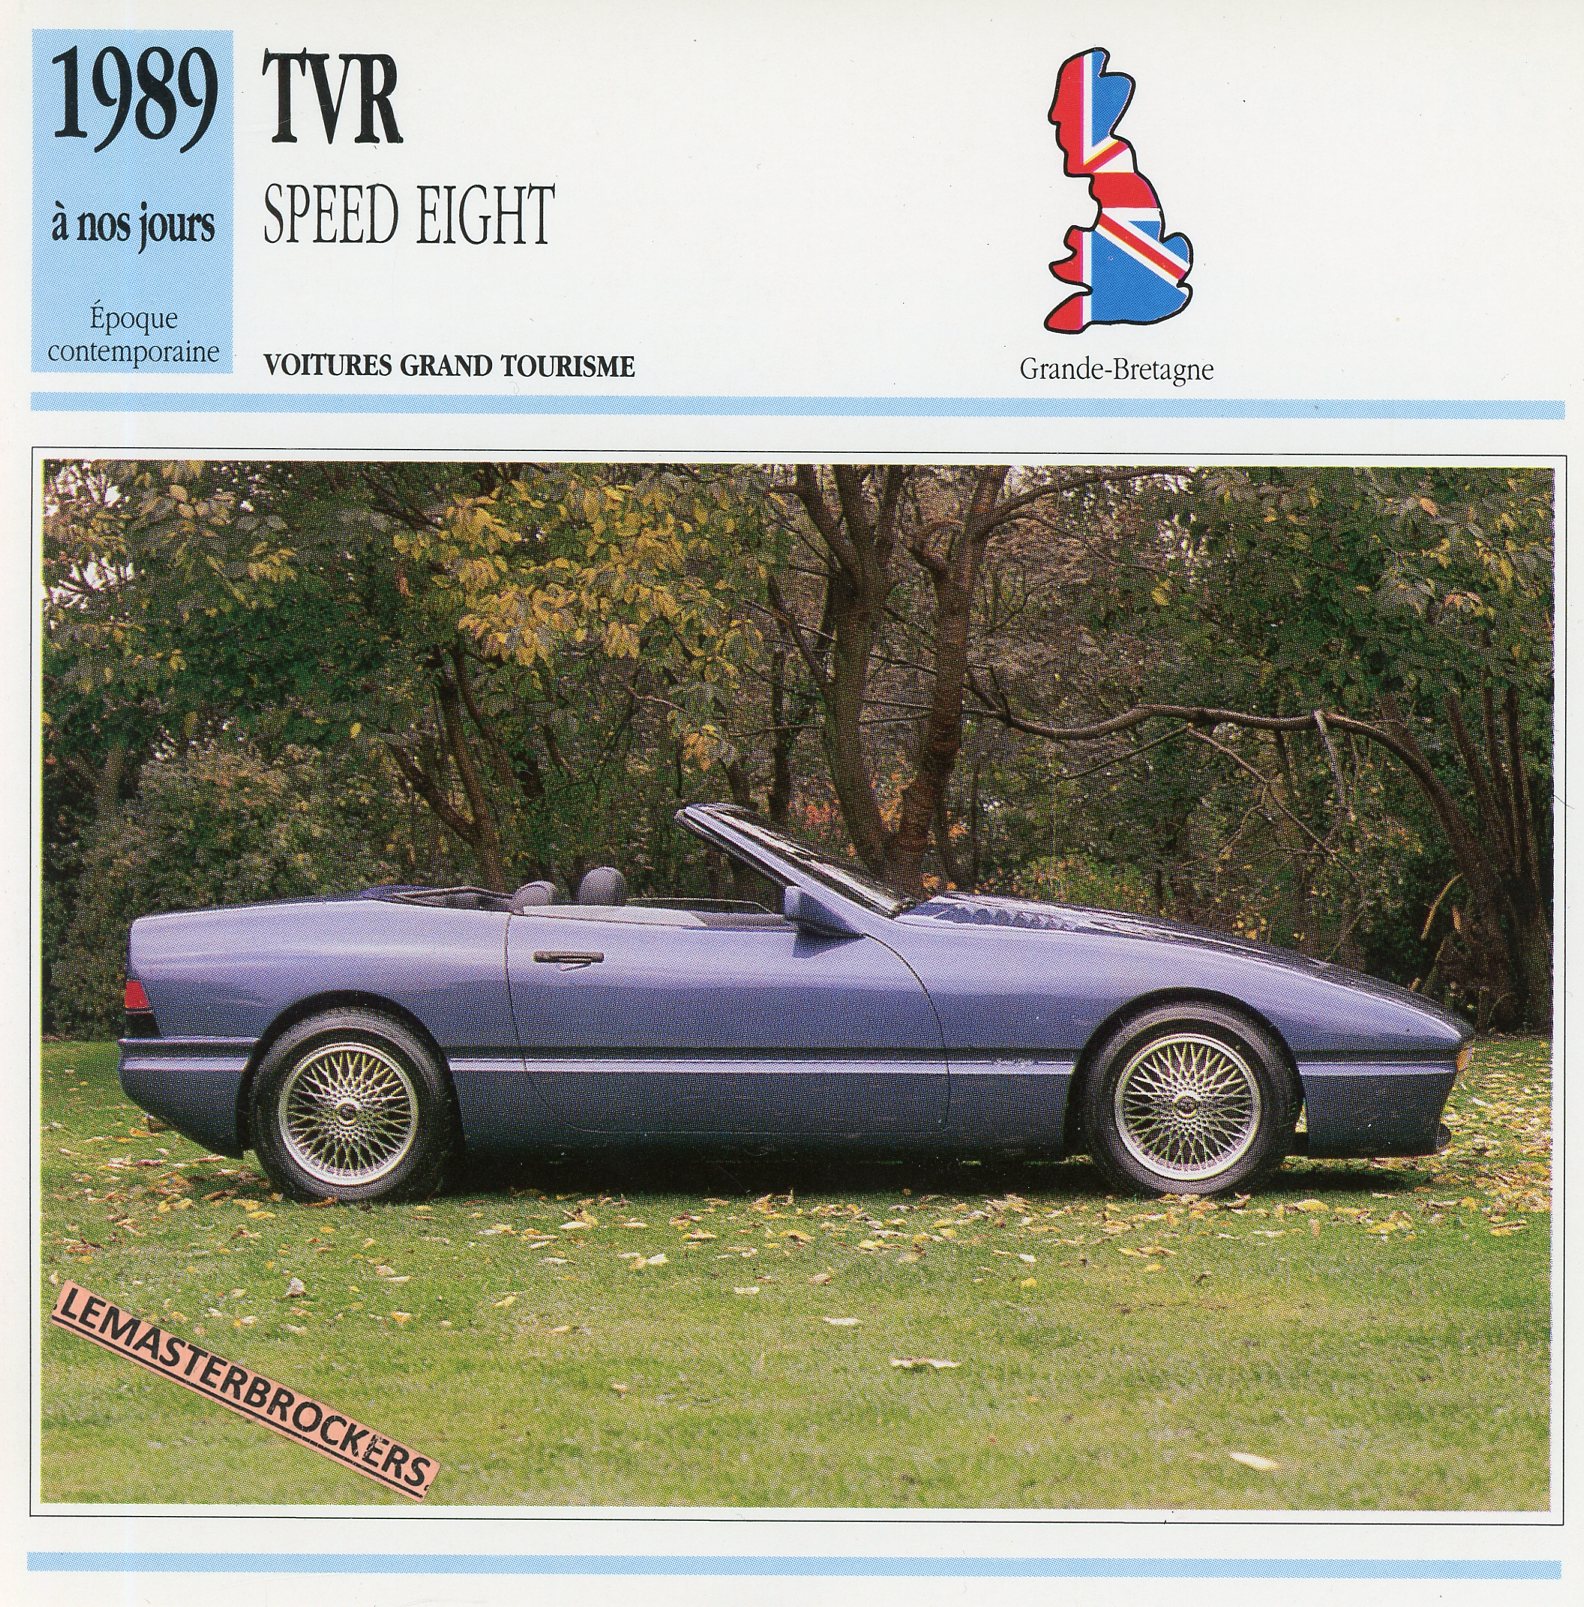 TVR-SPEED-EIGHT-1989-FICHE-AUTO-CARD-CARS-LEMASTERBROCKERS